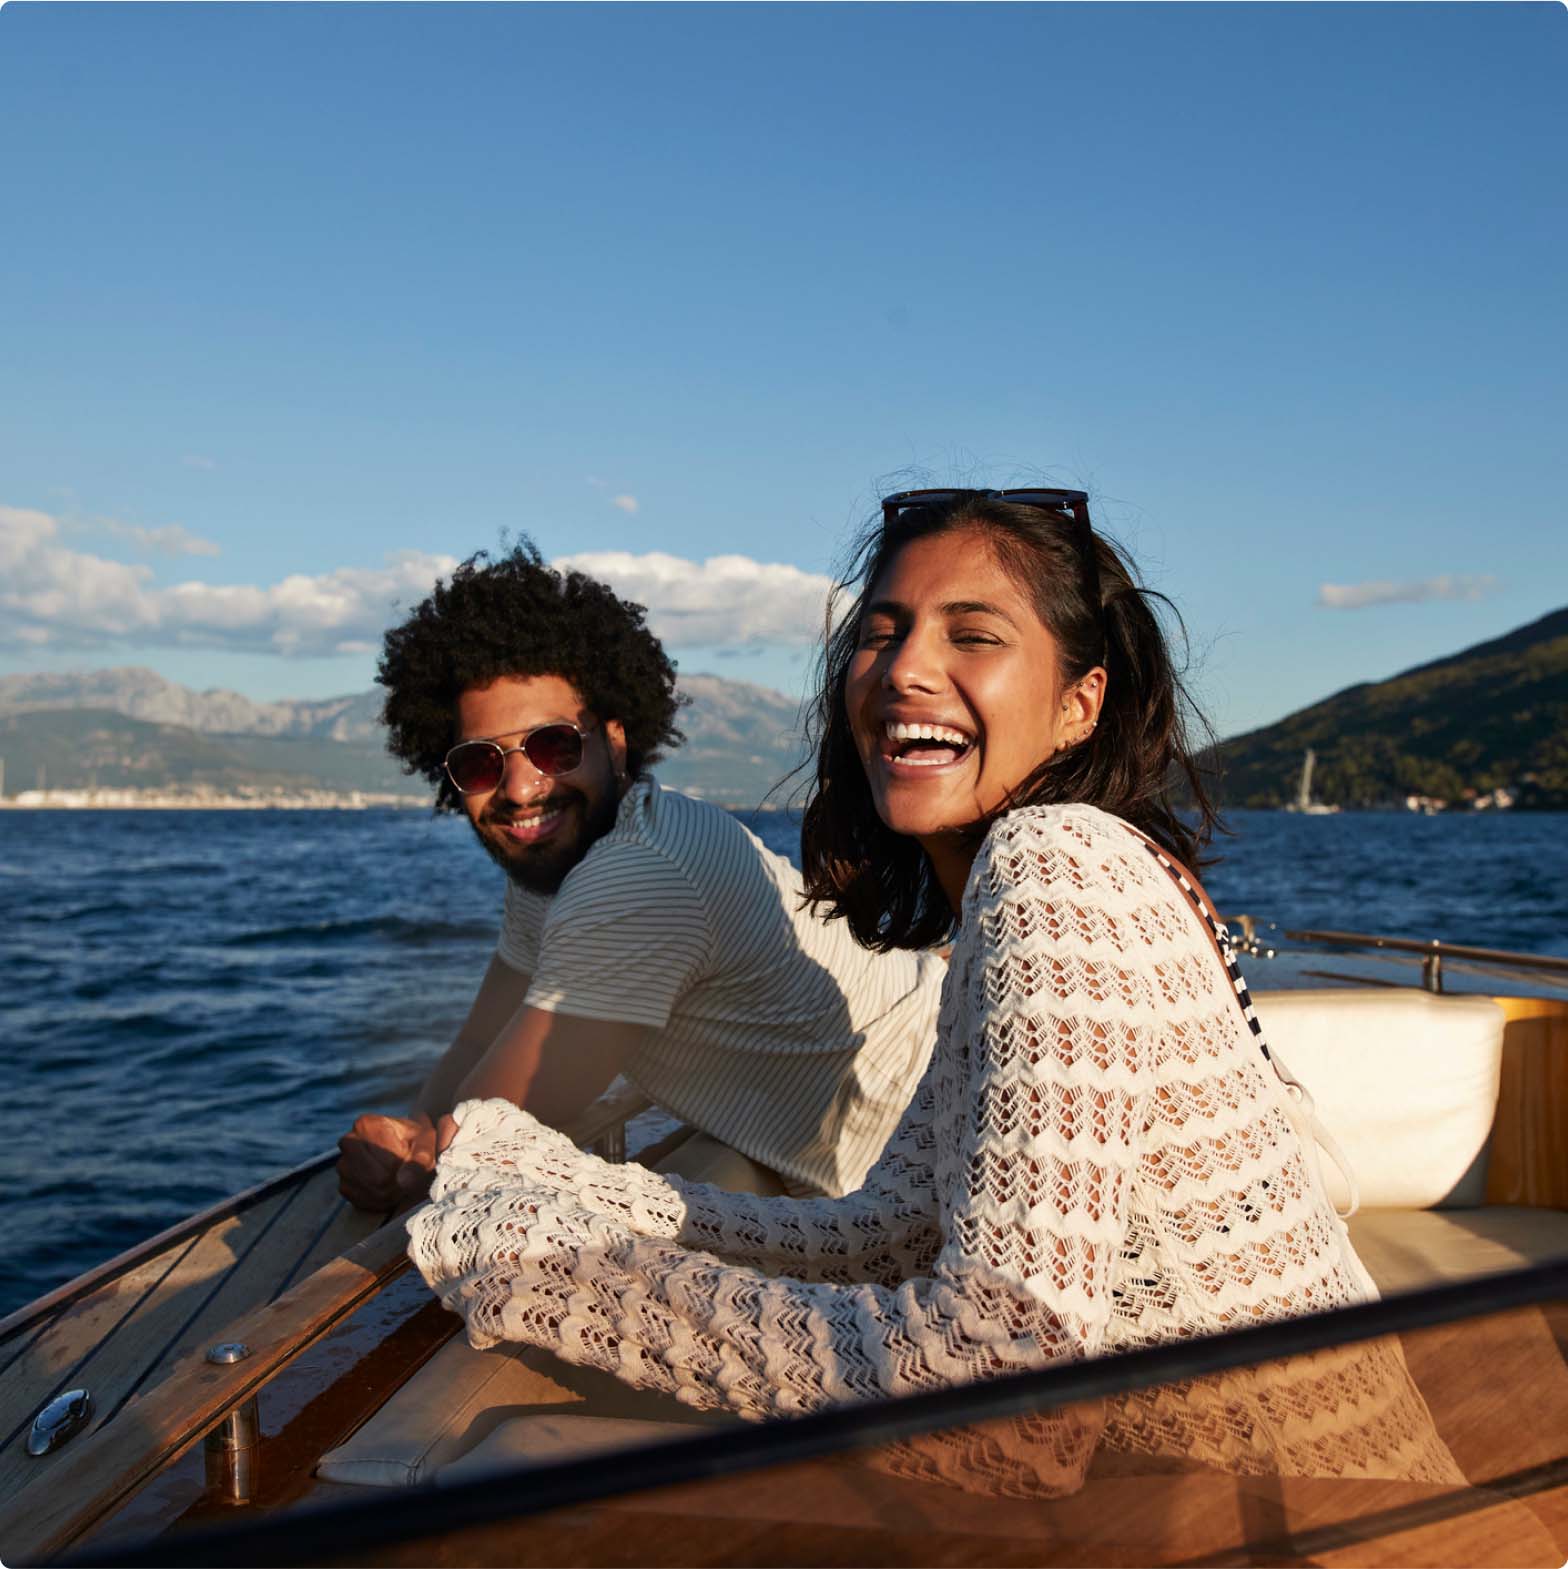 Happy couple smiling on a boat on a sunny day